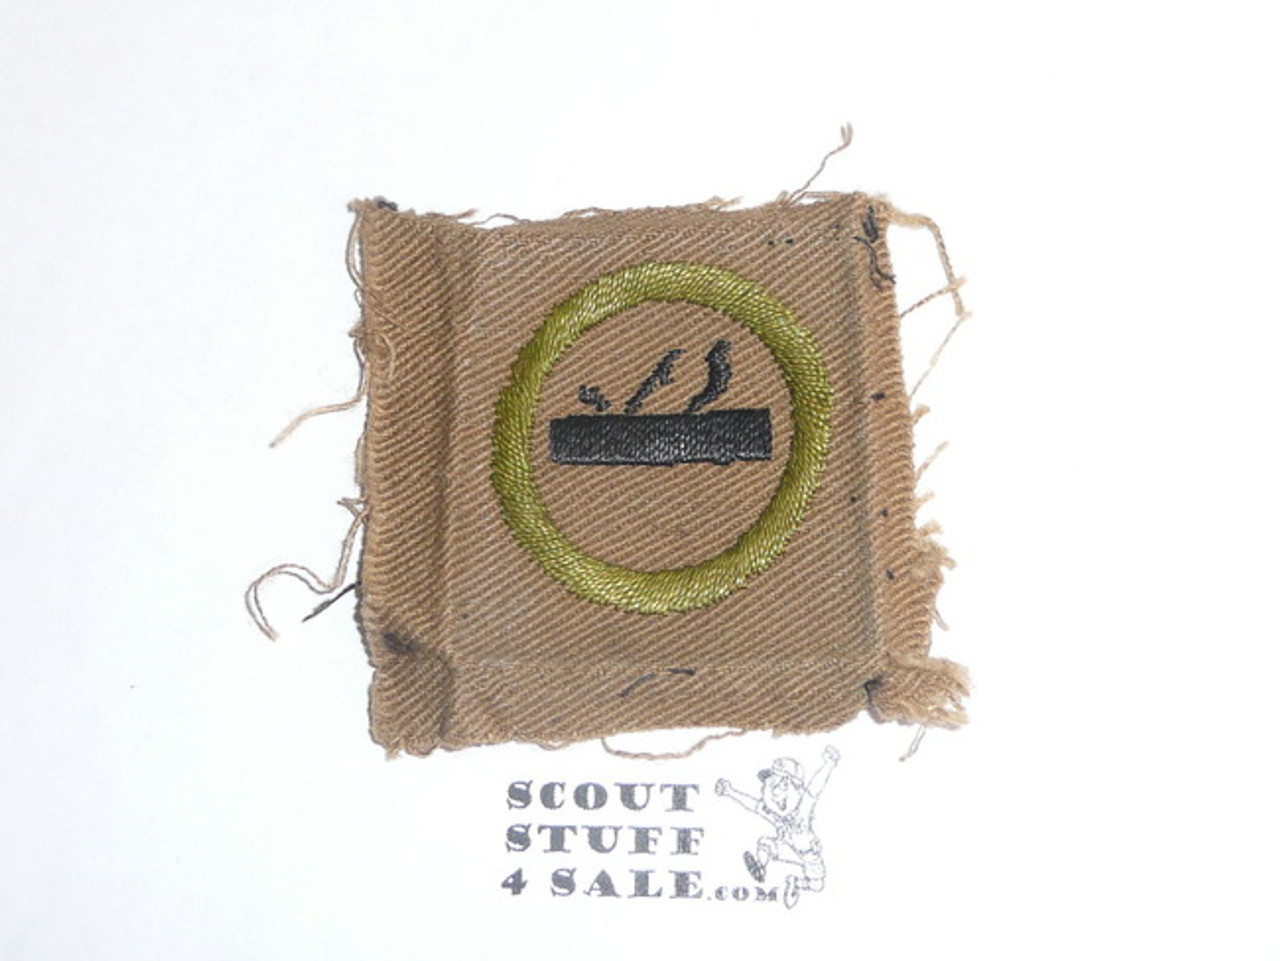 Carpentry / Woodwork - Type A - Square Tan Merit Badge (1911-1933), TEENS variety, brown striped back with BSA emblem, used